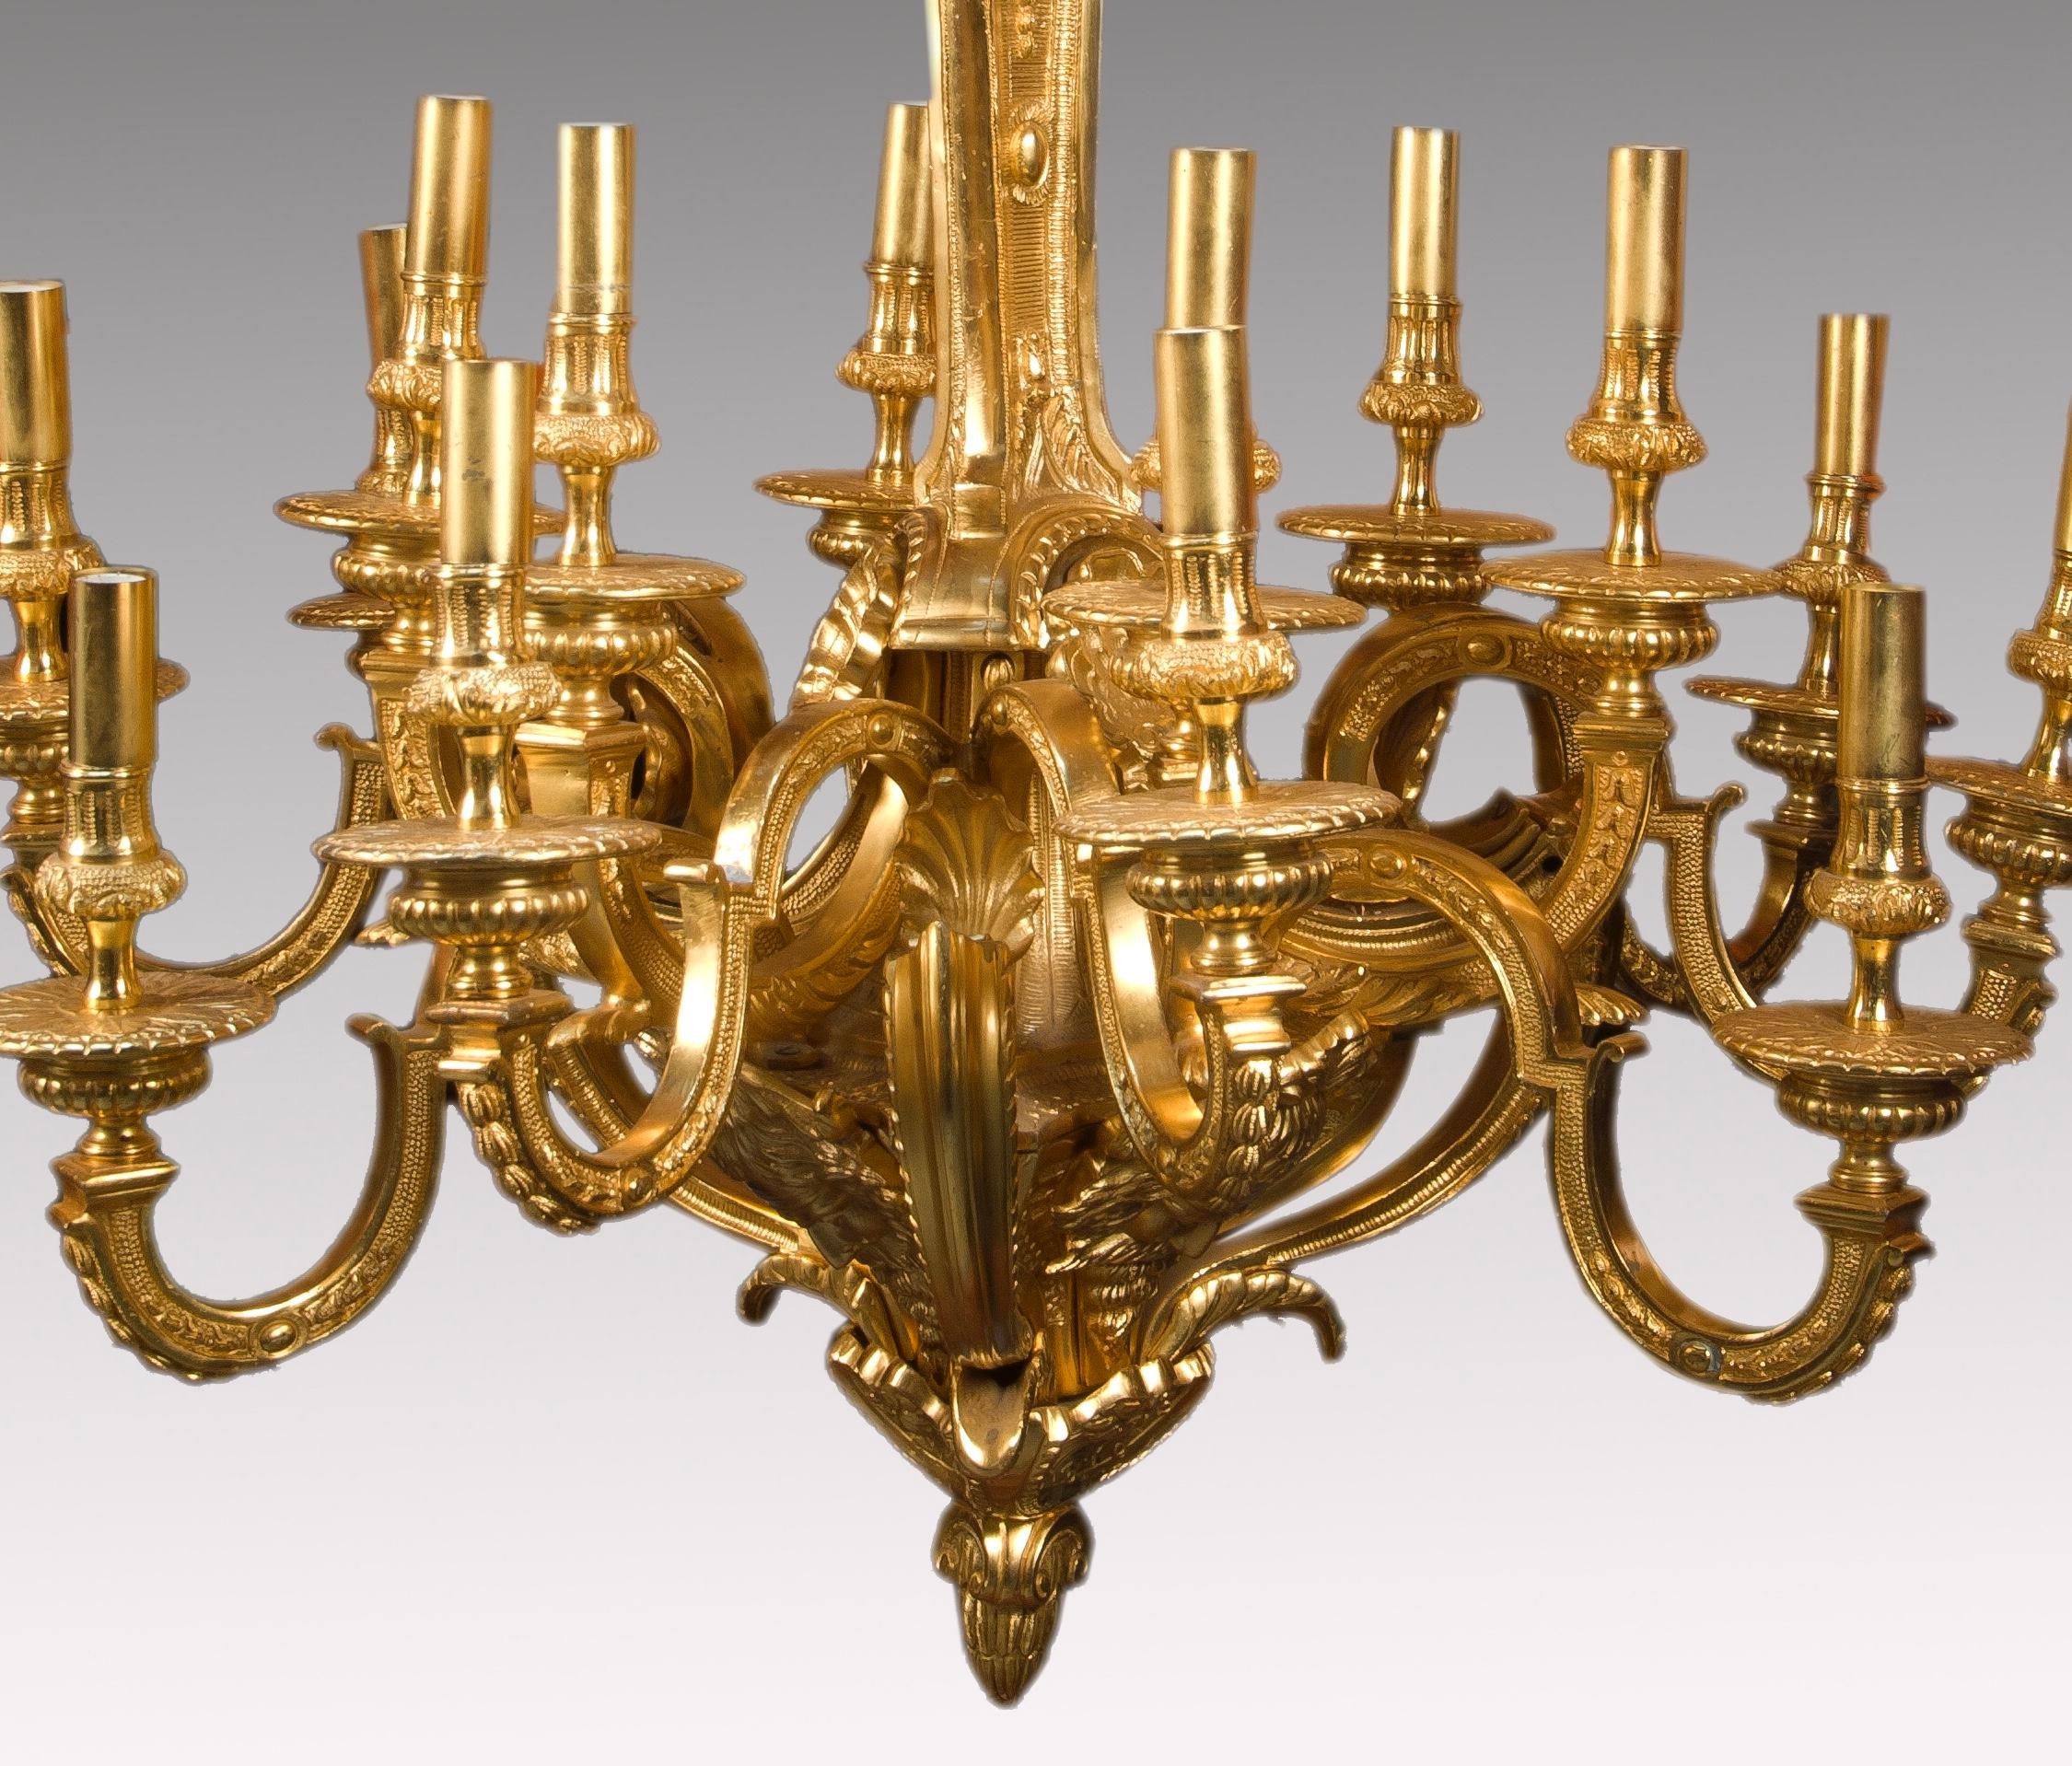 Spider-type ceiling lamp made of gilded bronze and decorated with motifs of garlands, vegetable stems and leaves, gilled shapes and architectural elements all arranged with curves and countercurves, as befits the so-called Louis XVI style, which